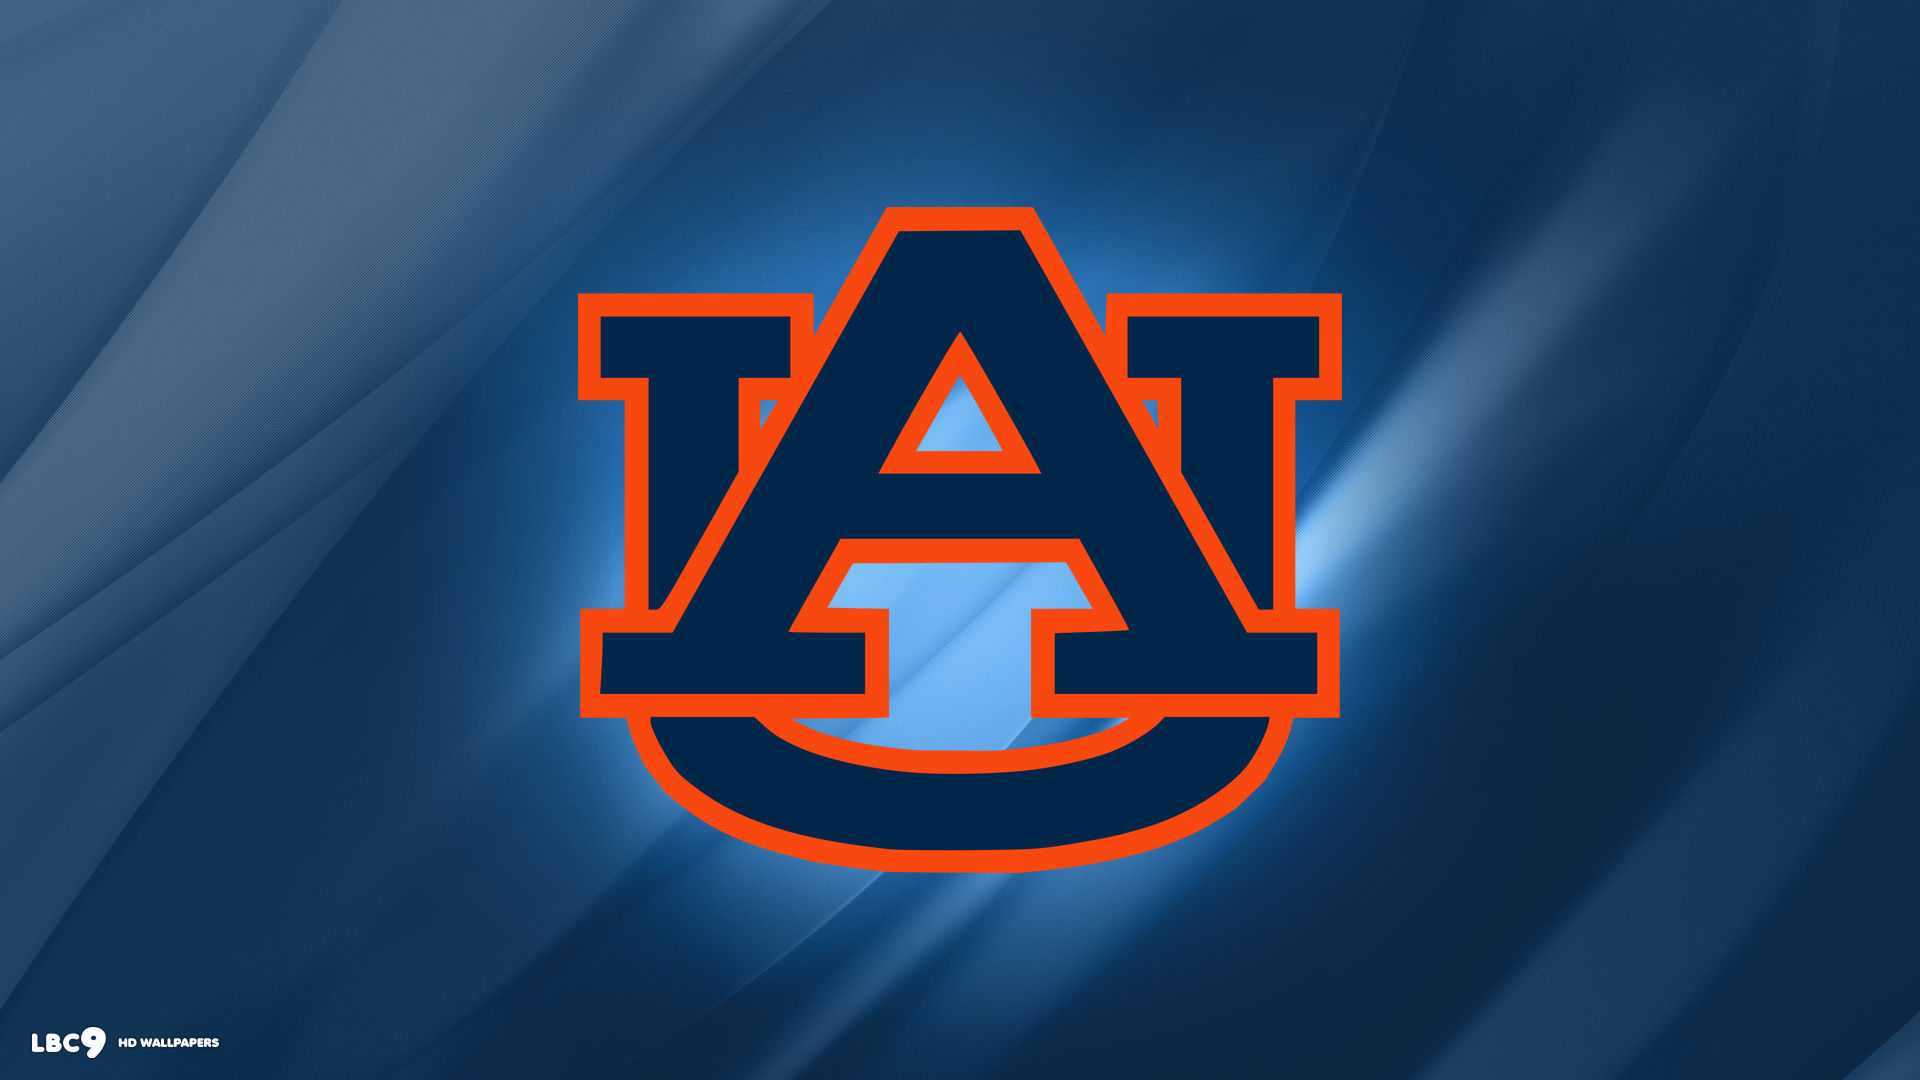 Auburn Football on X Looking for a new  wallpaper Weve got you  covered  WarEagle  WallpaperWednesday httpstcoHf5ZRIPDyR  X